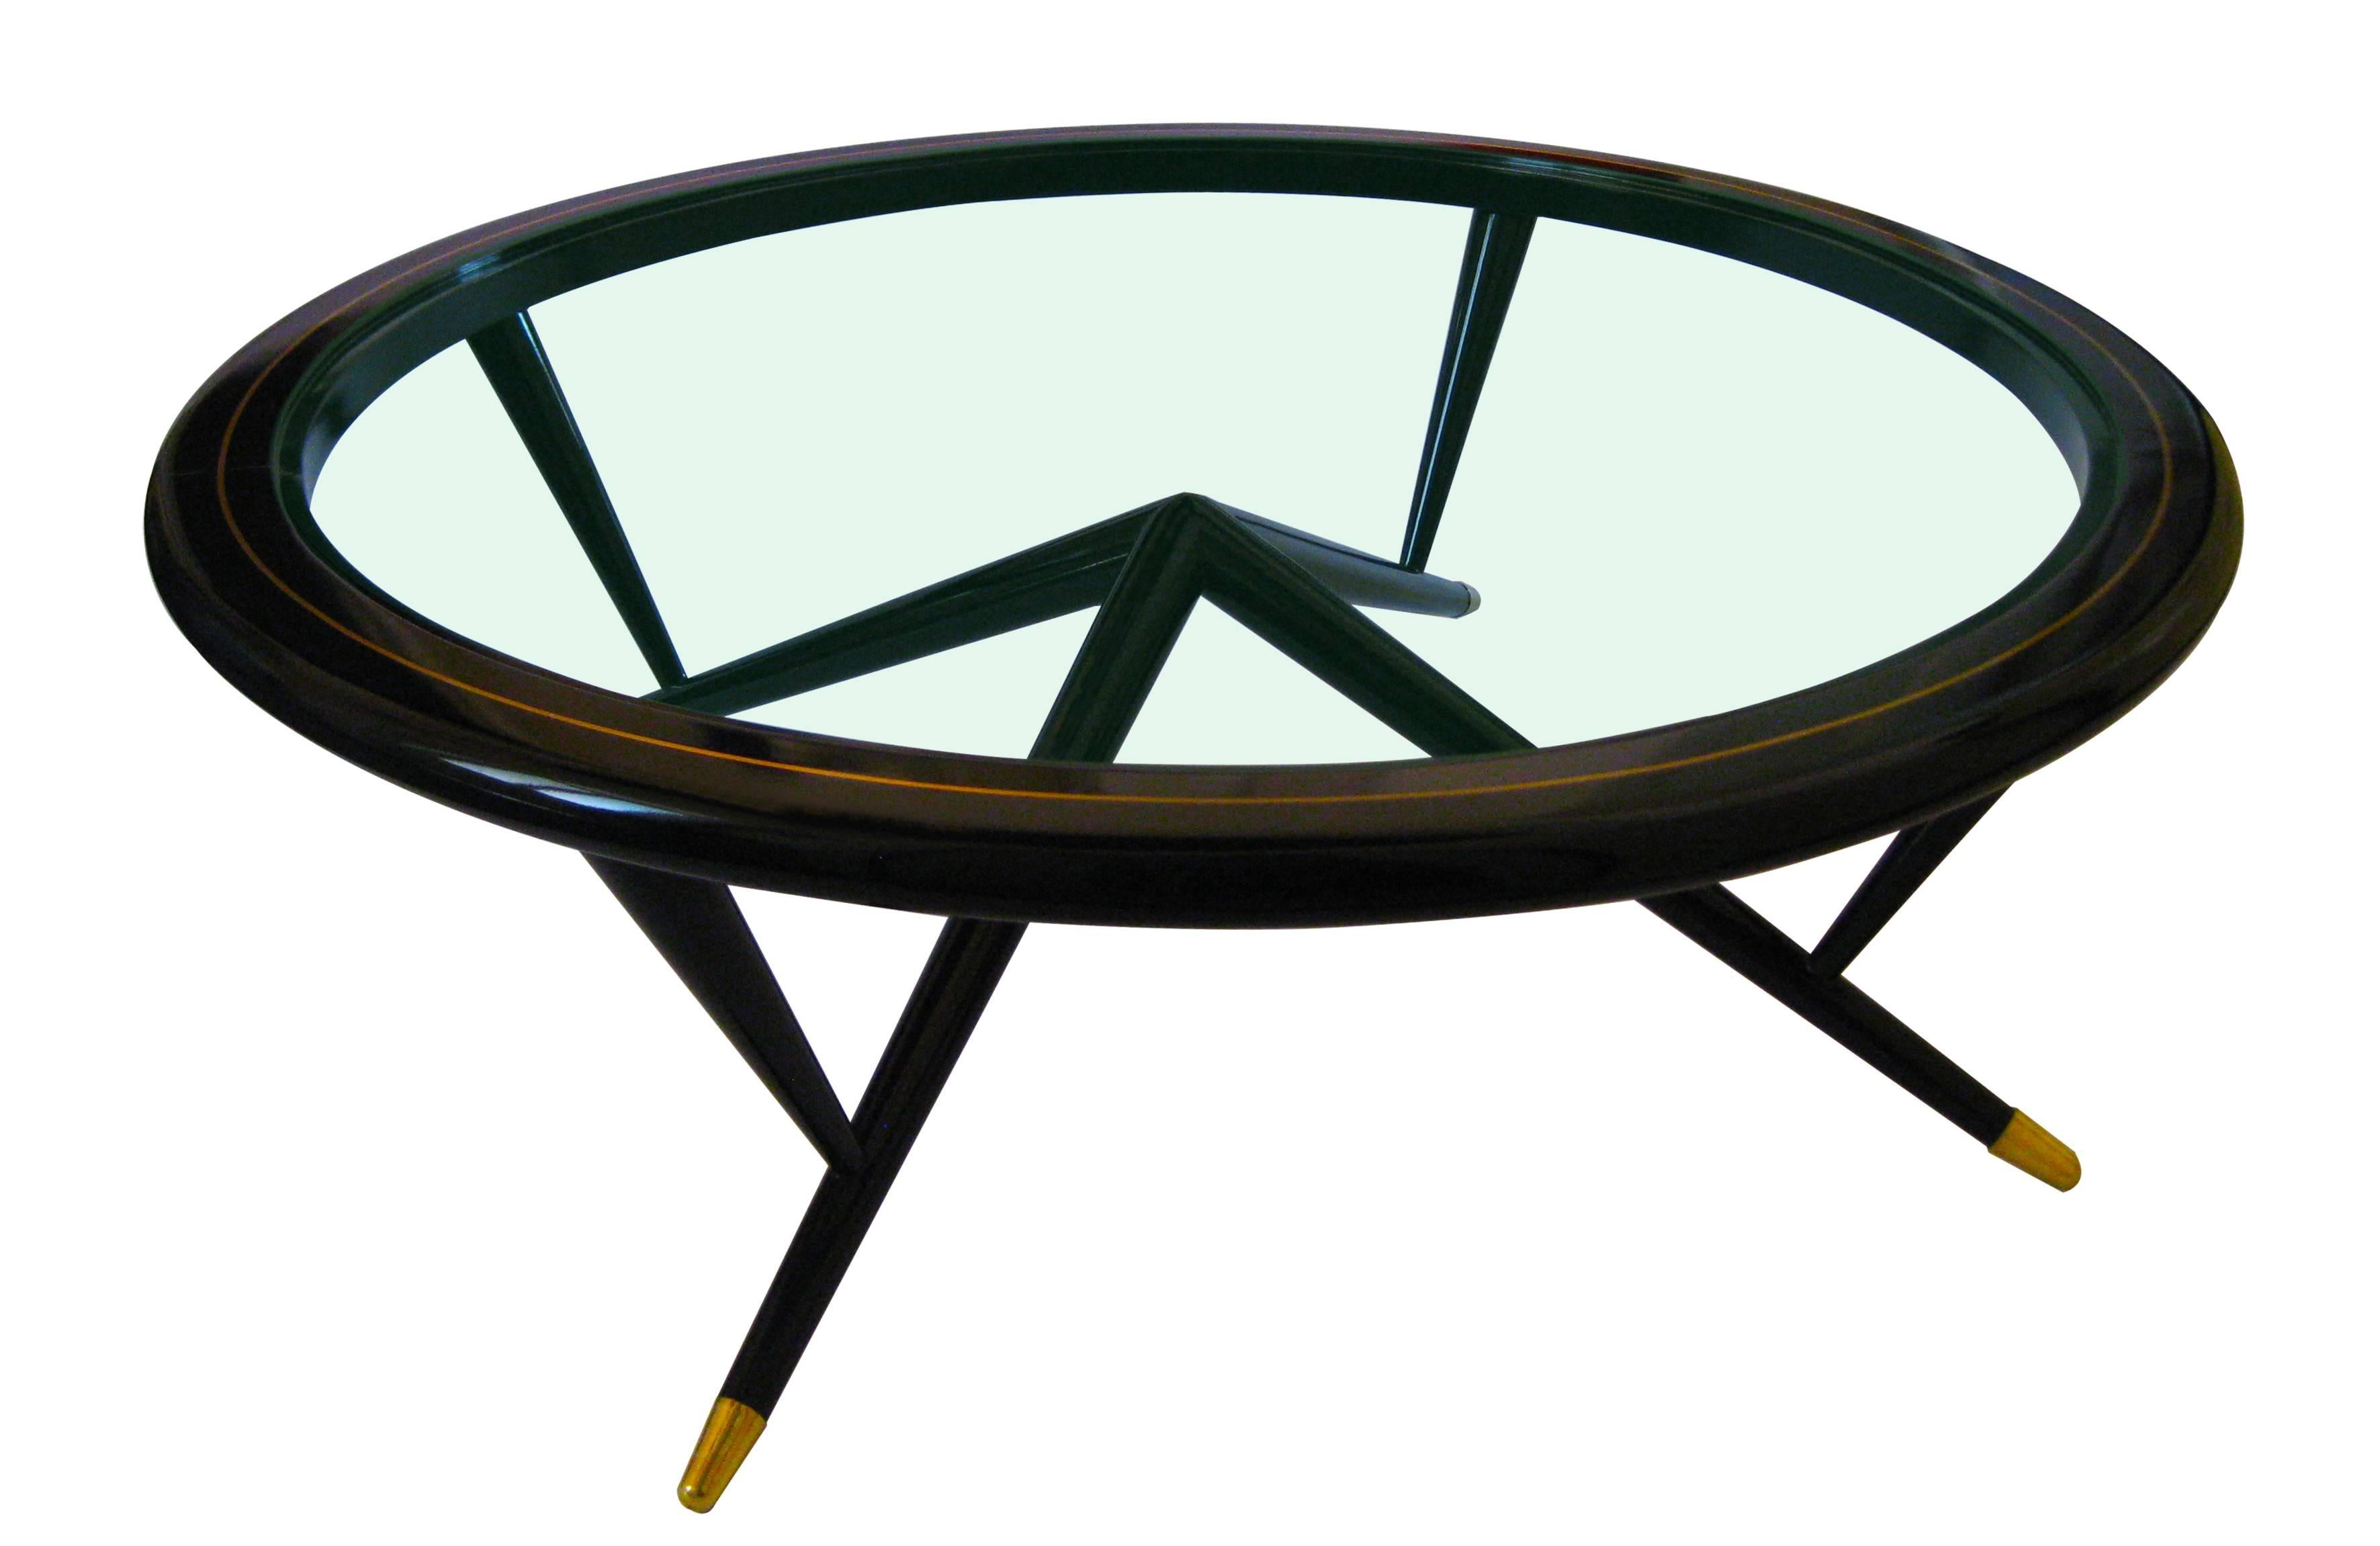 Glass center table of black lacquered mahogany adorned with brass inlay and sabots.